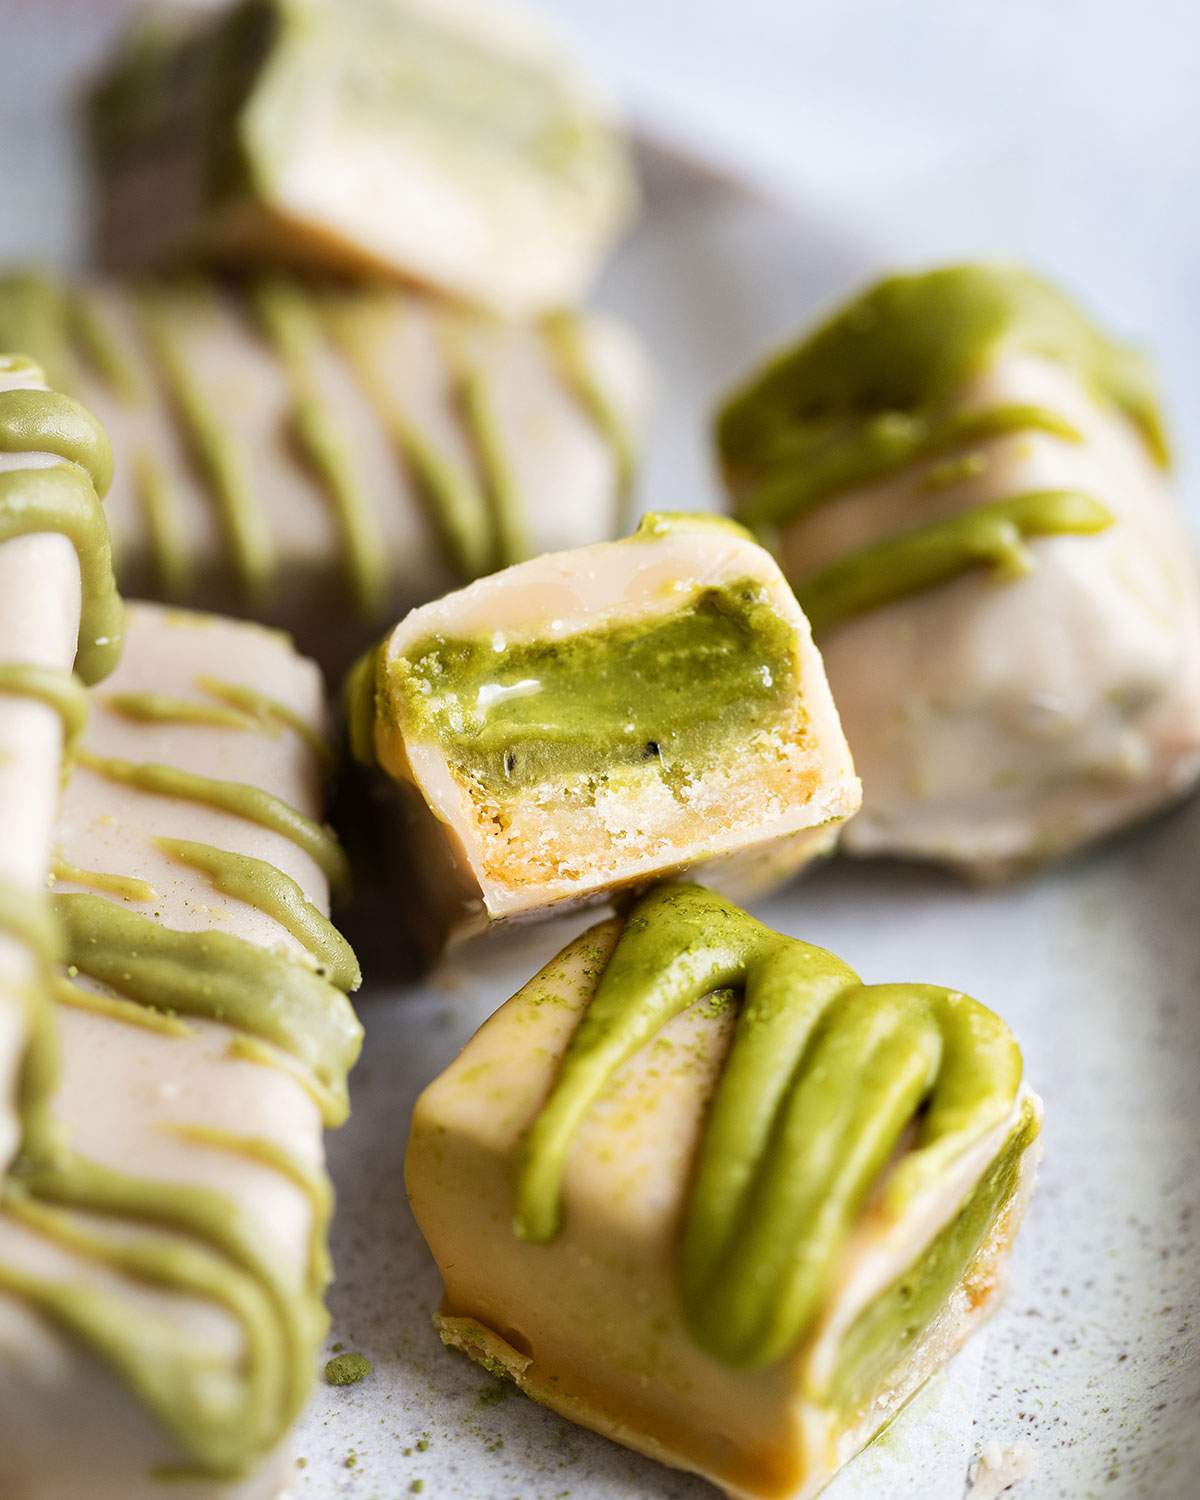 White chocolate matcha twix bars on a serving plate and one bar is cut in half and you can clearly see the green matcha caramel inside the bar.